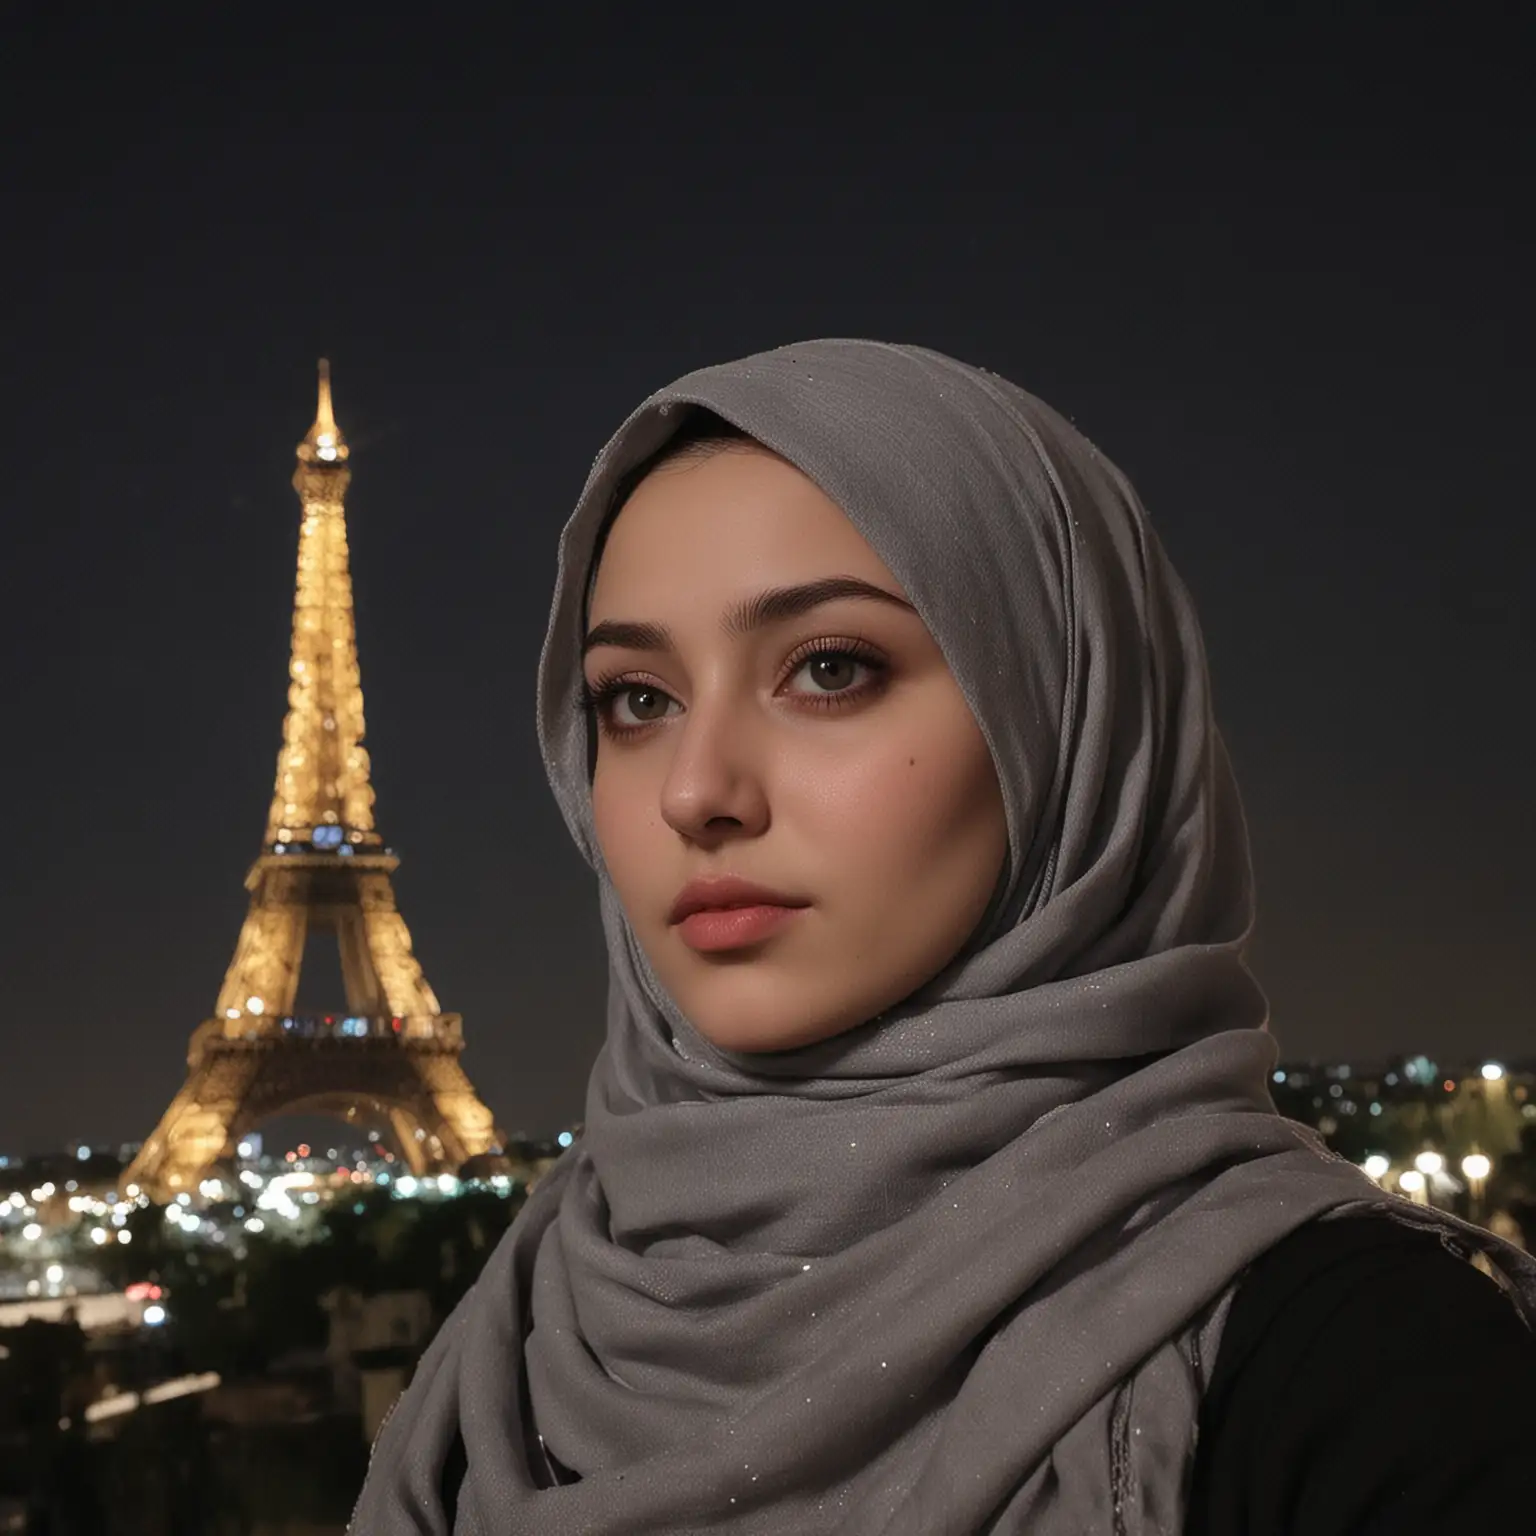 Turkish-Girl-in-Simple-Grey-Hijab-Standing-under-Moonlight-with-Eiffel-Tower-in-Background